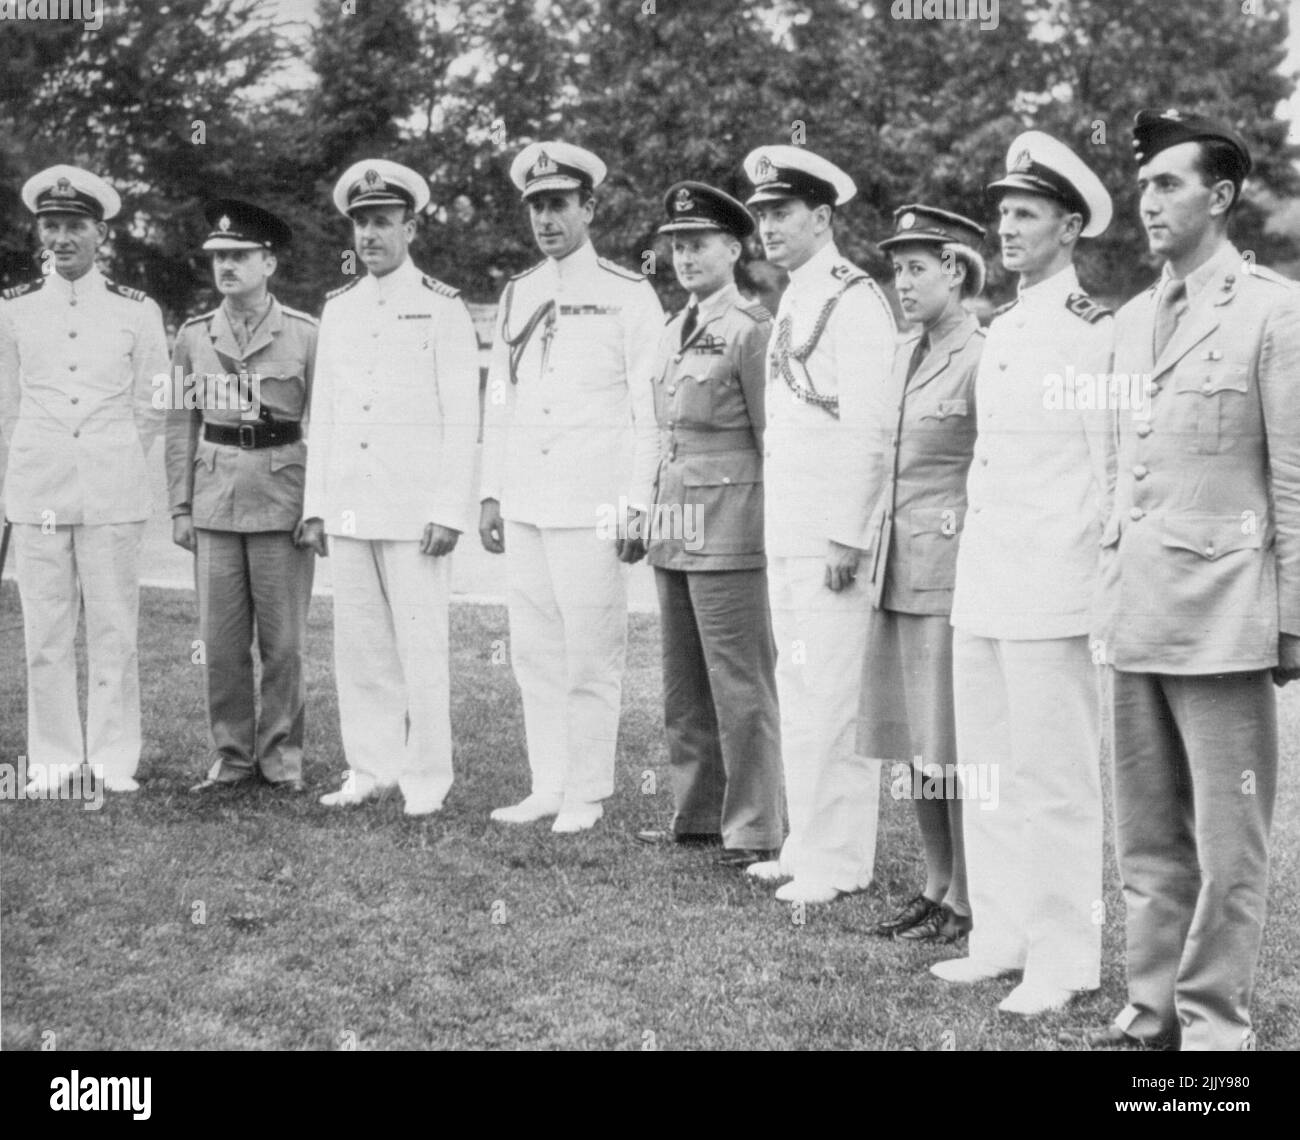 Lord Louis and staff arrive to discuss plans Lord Louis Mountbatten (fourth from left), New Allied Commander fro SouthEast Asia, arrives with staff to visit Adm. Ernest J. King, U.S. Navy Chief, to begin discussions expected to result in final plans for ***** Japs from Burma. (L-R) Lt. Comdr. C.E.H. Batham, R.N., Lt. Col. M.E. *****, Capt. H.D. Tollemache, R.N., Lord Louis , Lt. Comdr. A.E. Levenson, ***** Capt. A.W.F. Merer, Raf; Corp Joy Smith, Ats; Lt. Comdr. C.G.H. *****, and Maj. R.R. Fairbarn. August 26, 1943. (Photo by AP Wirephoto). Stock Photo